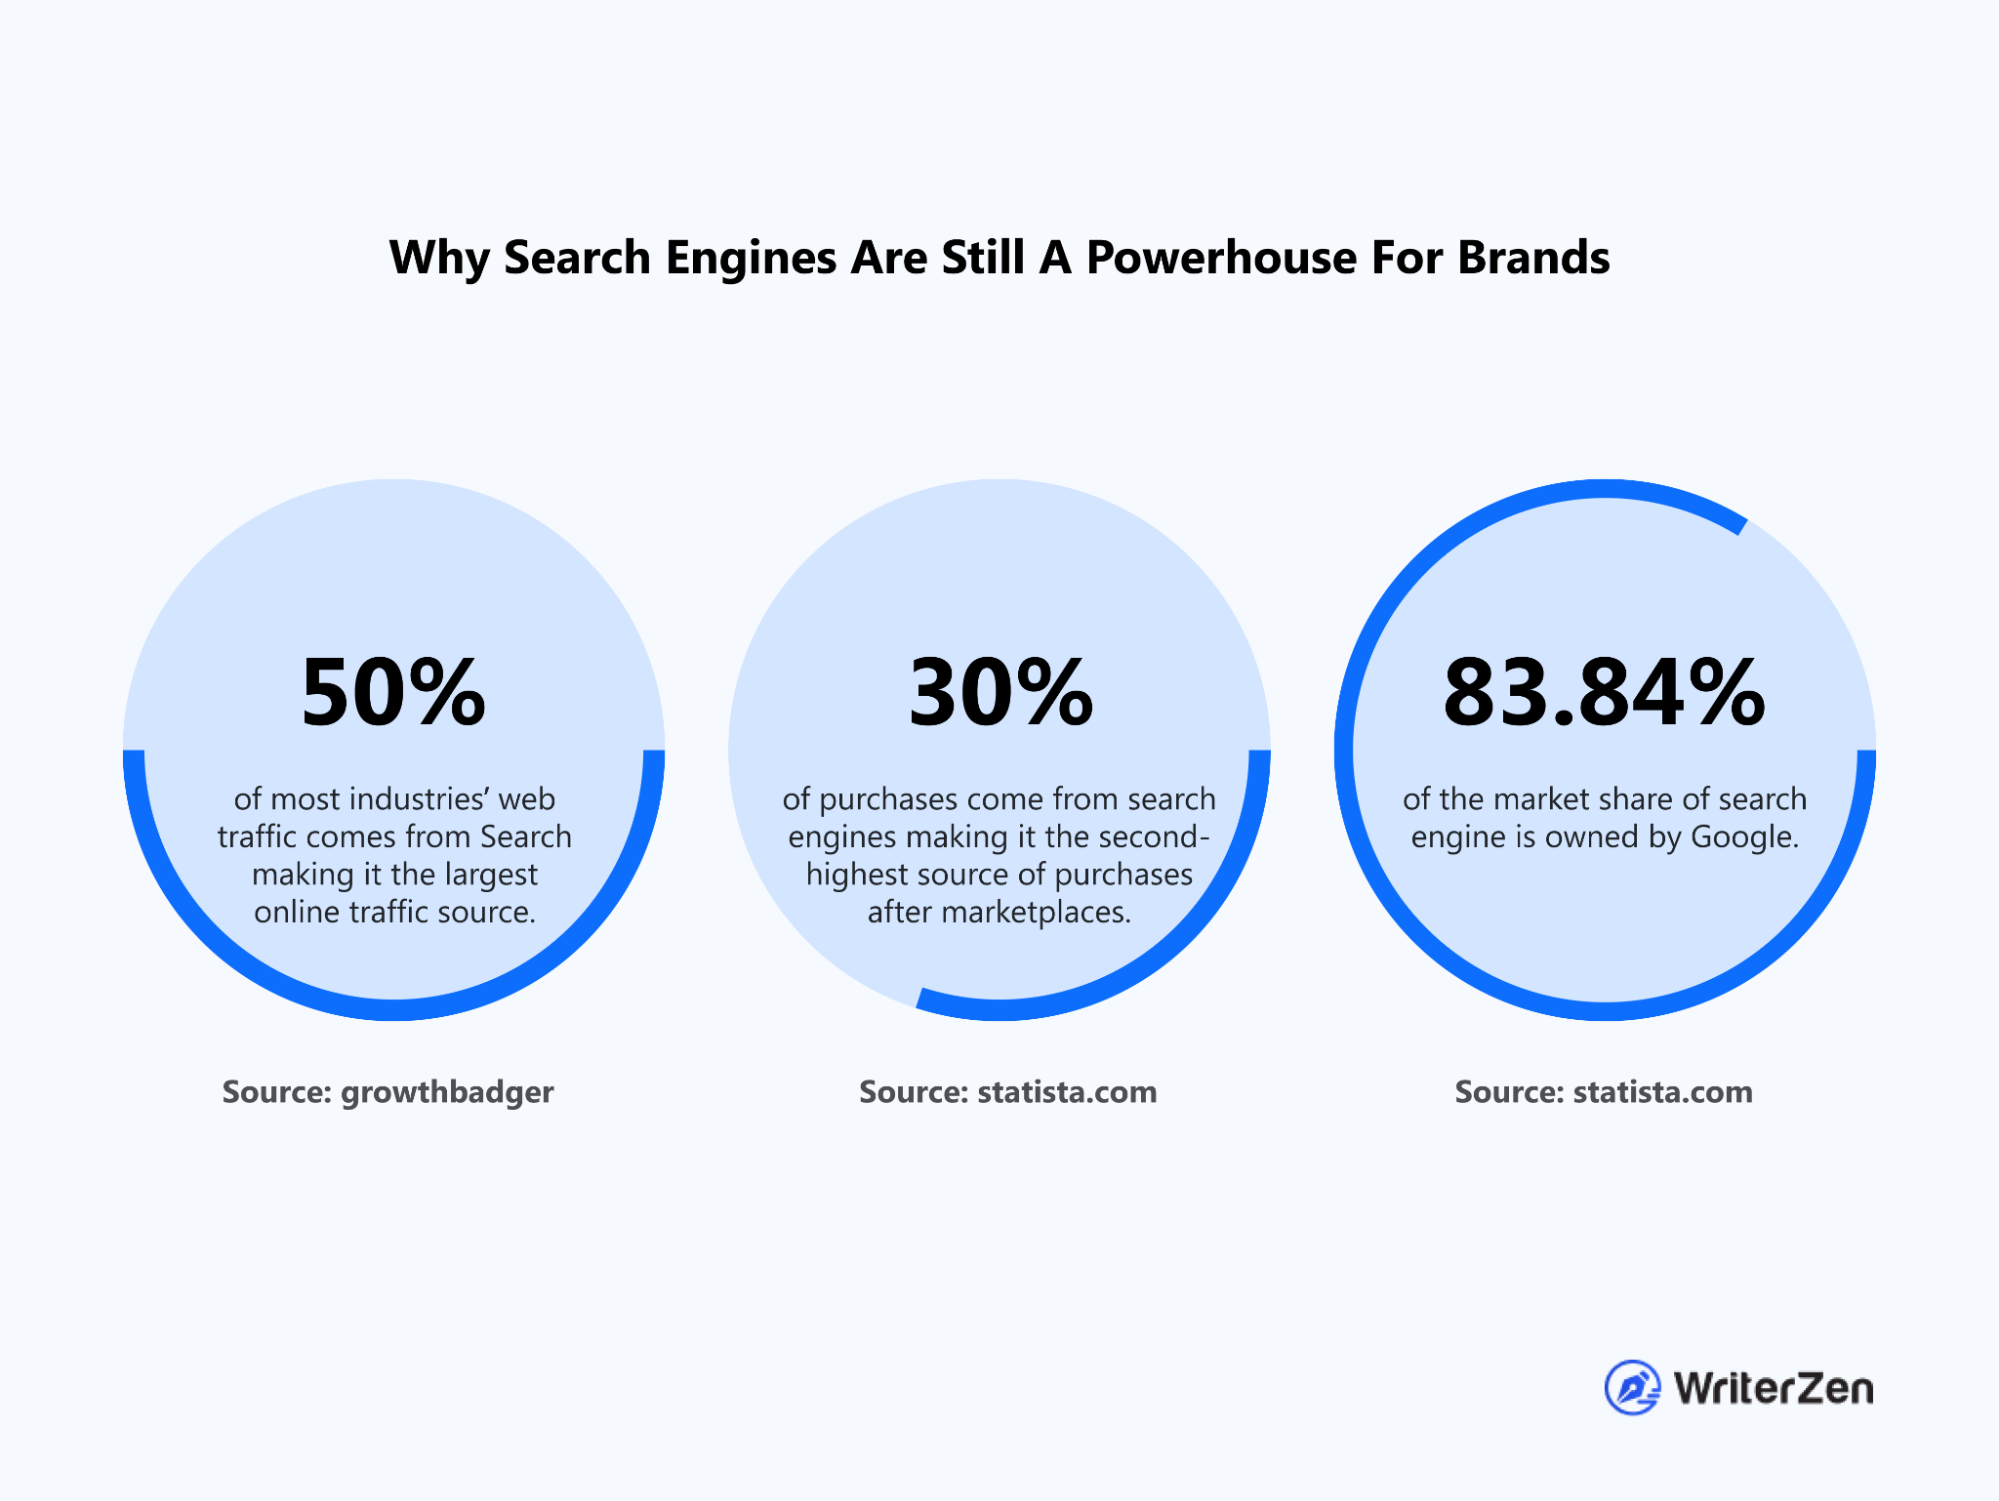 Why Search Engines Are Still A Powerhouse For Brands